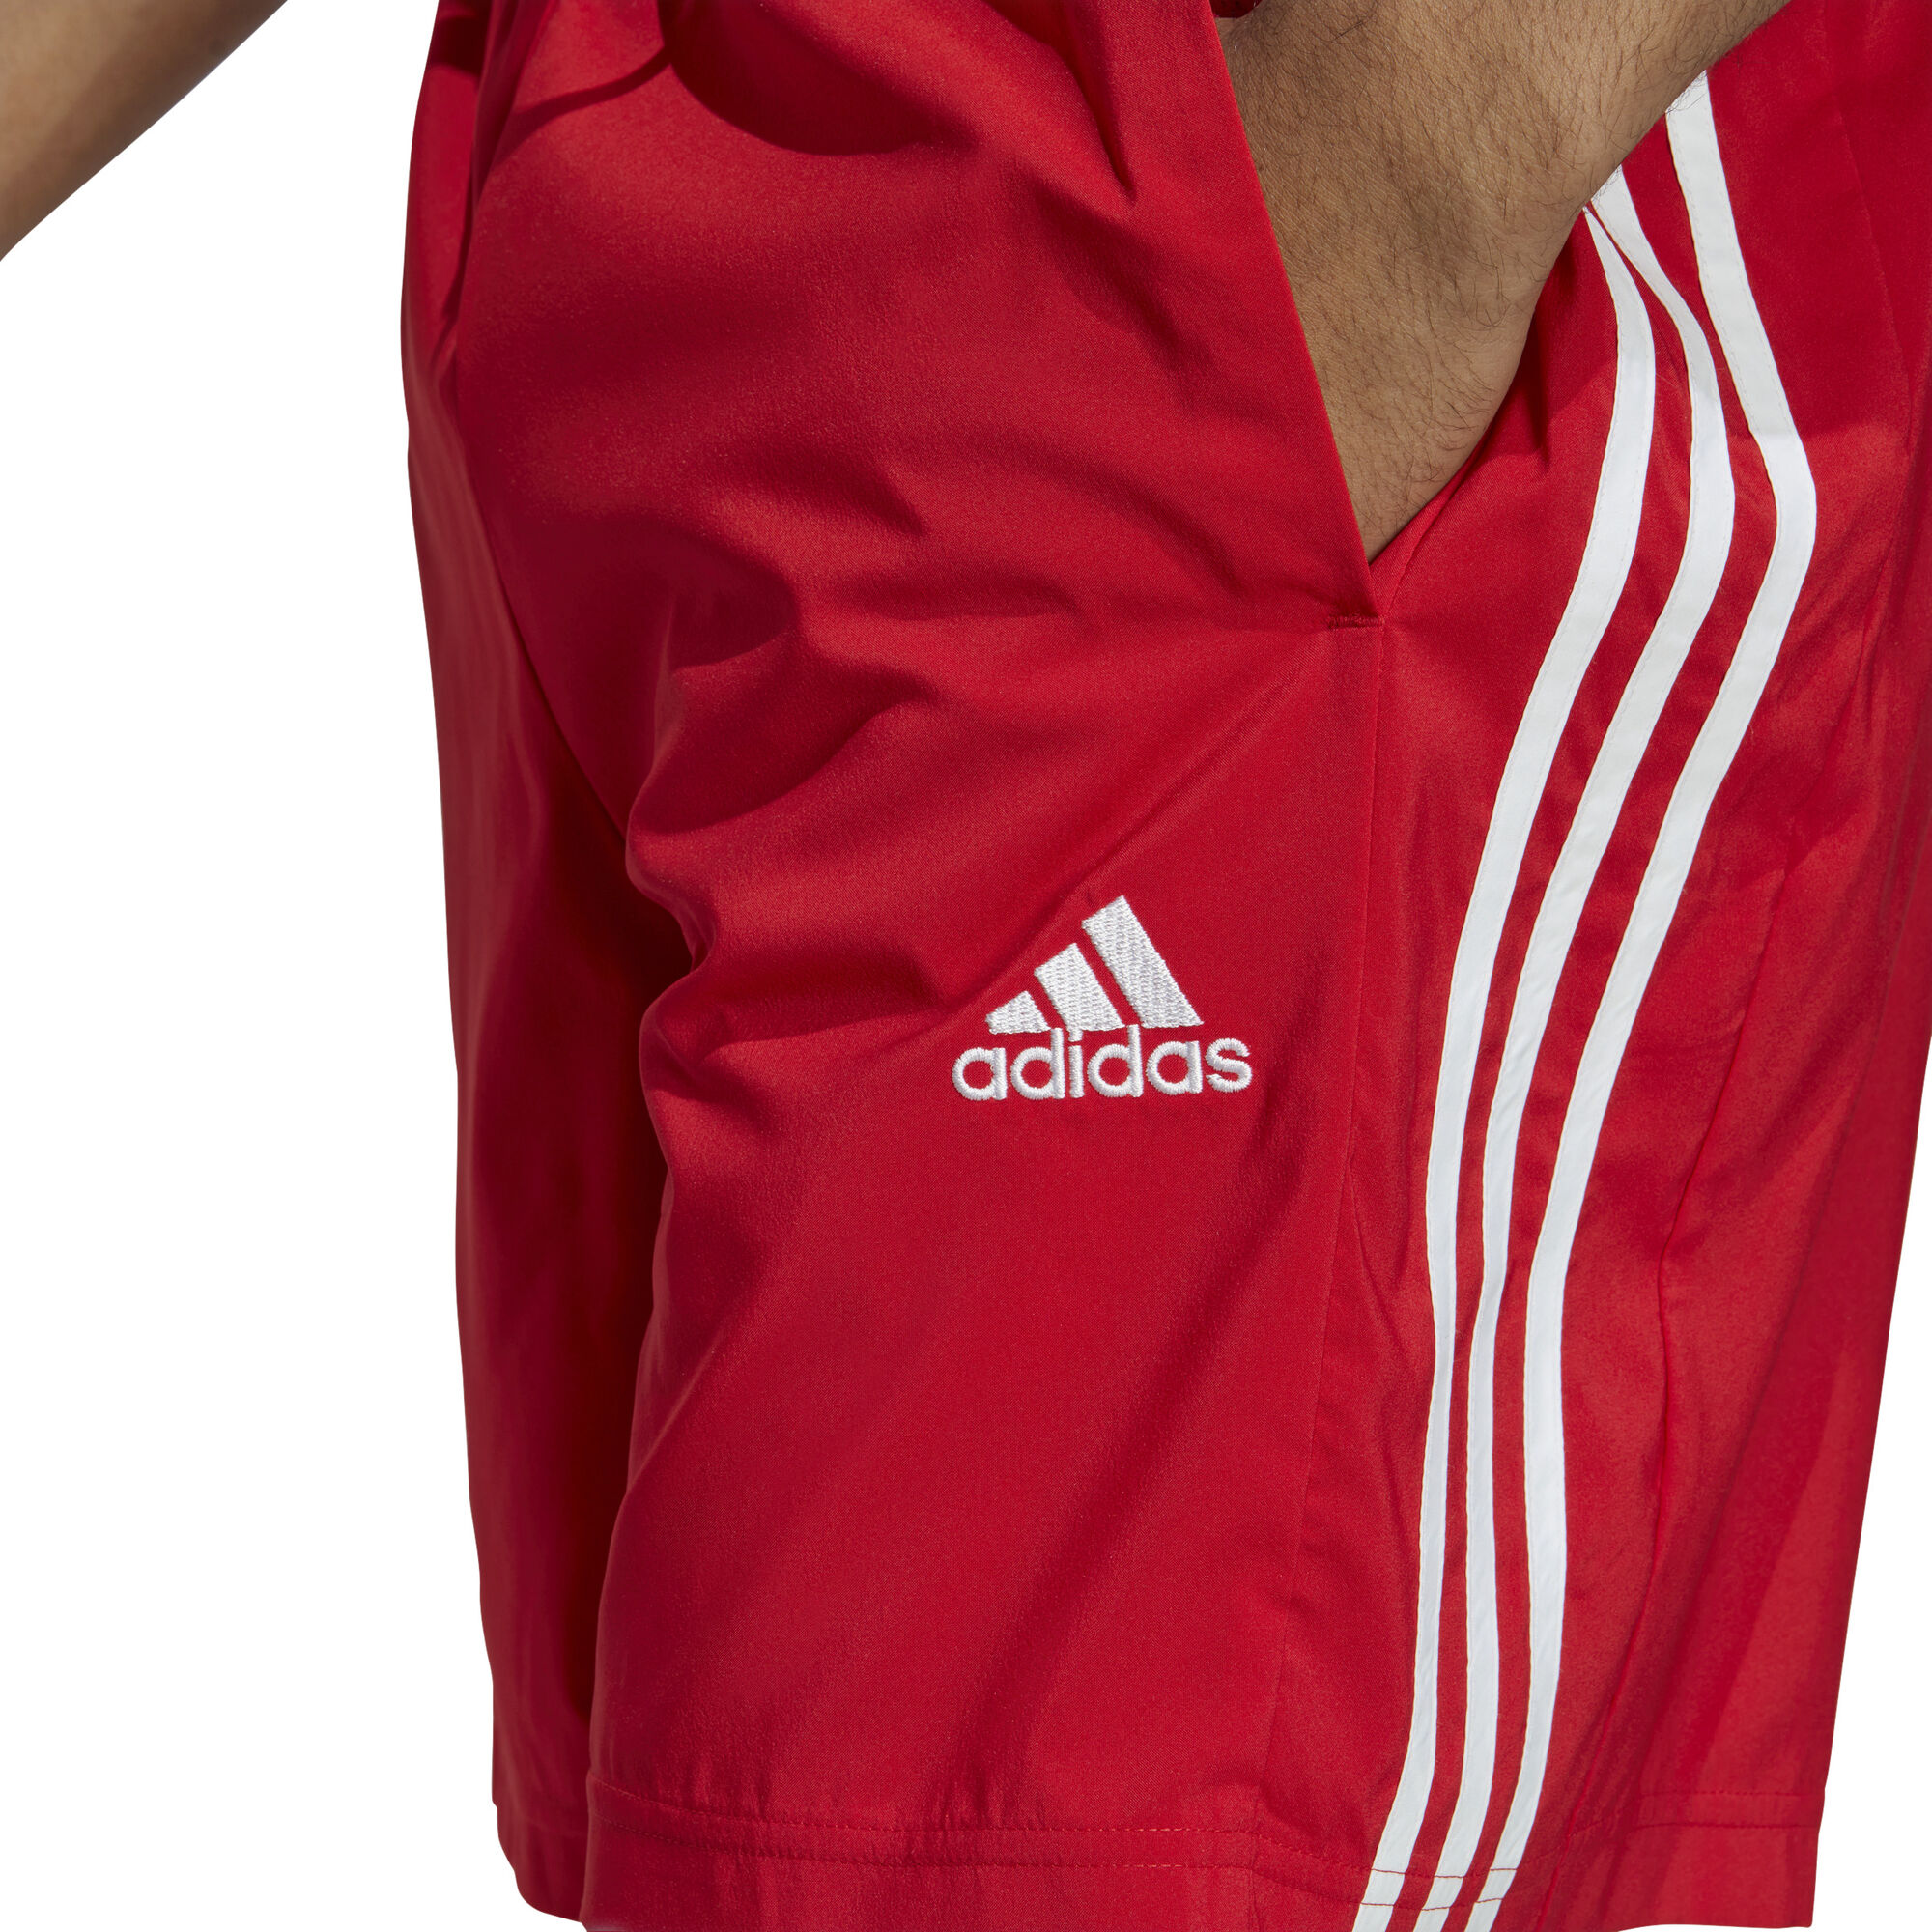 buy adidas Essentials Chelsea 3-Stripes Shorts - Red, | Tennis-Point